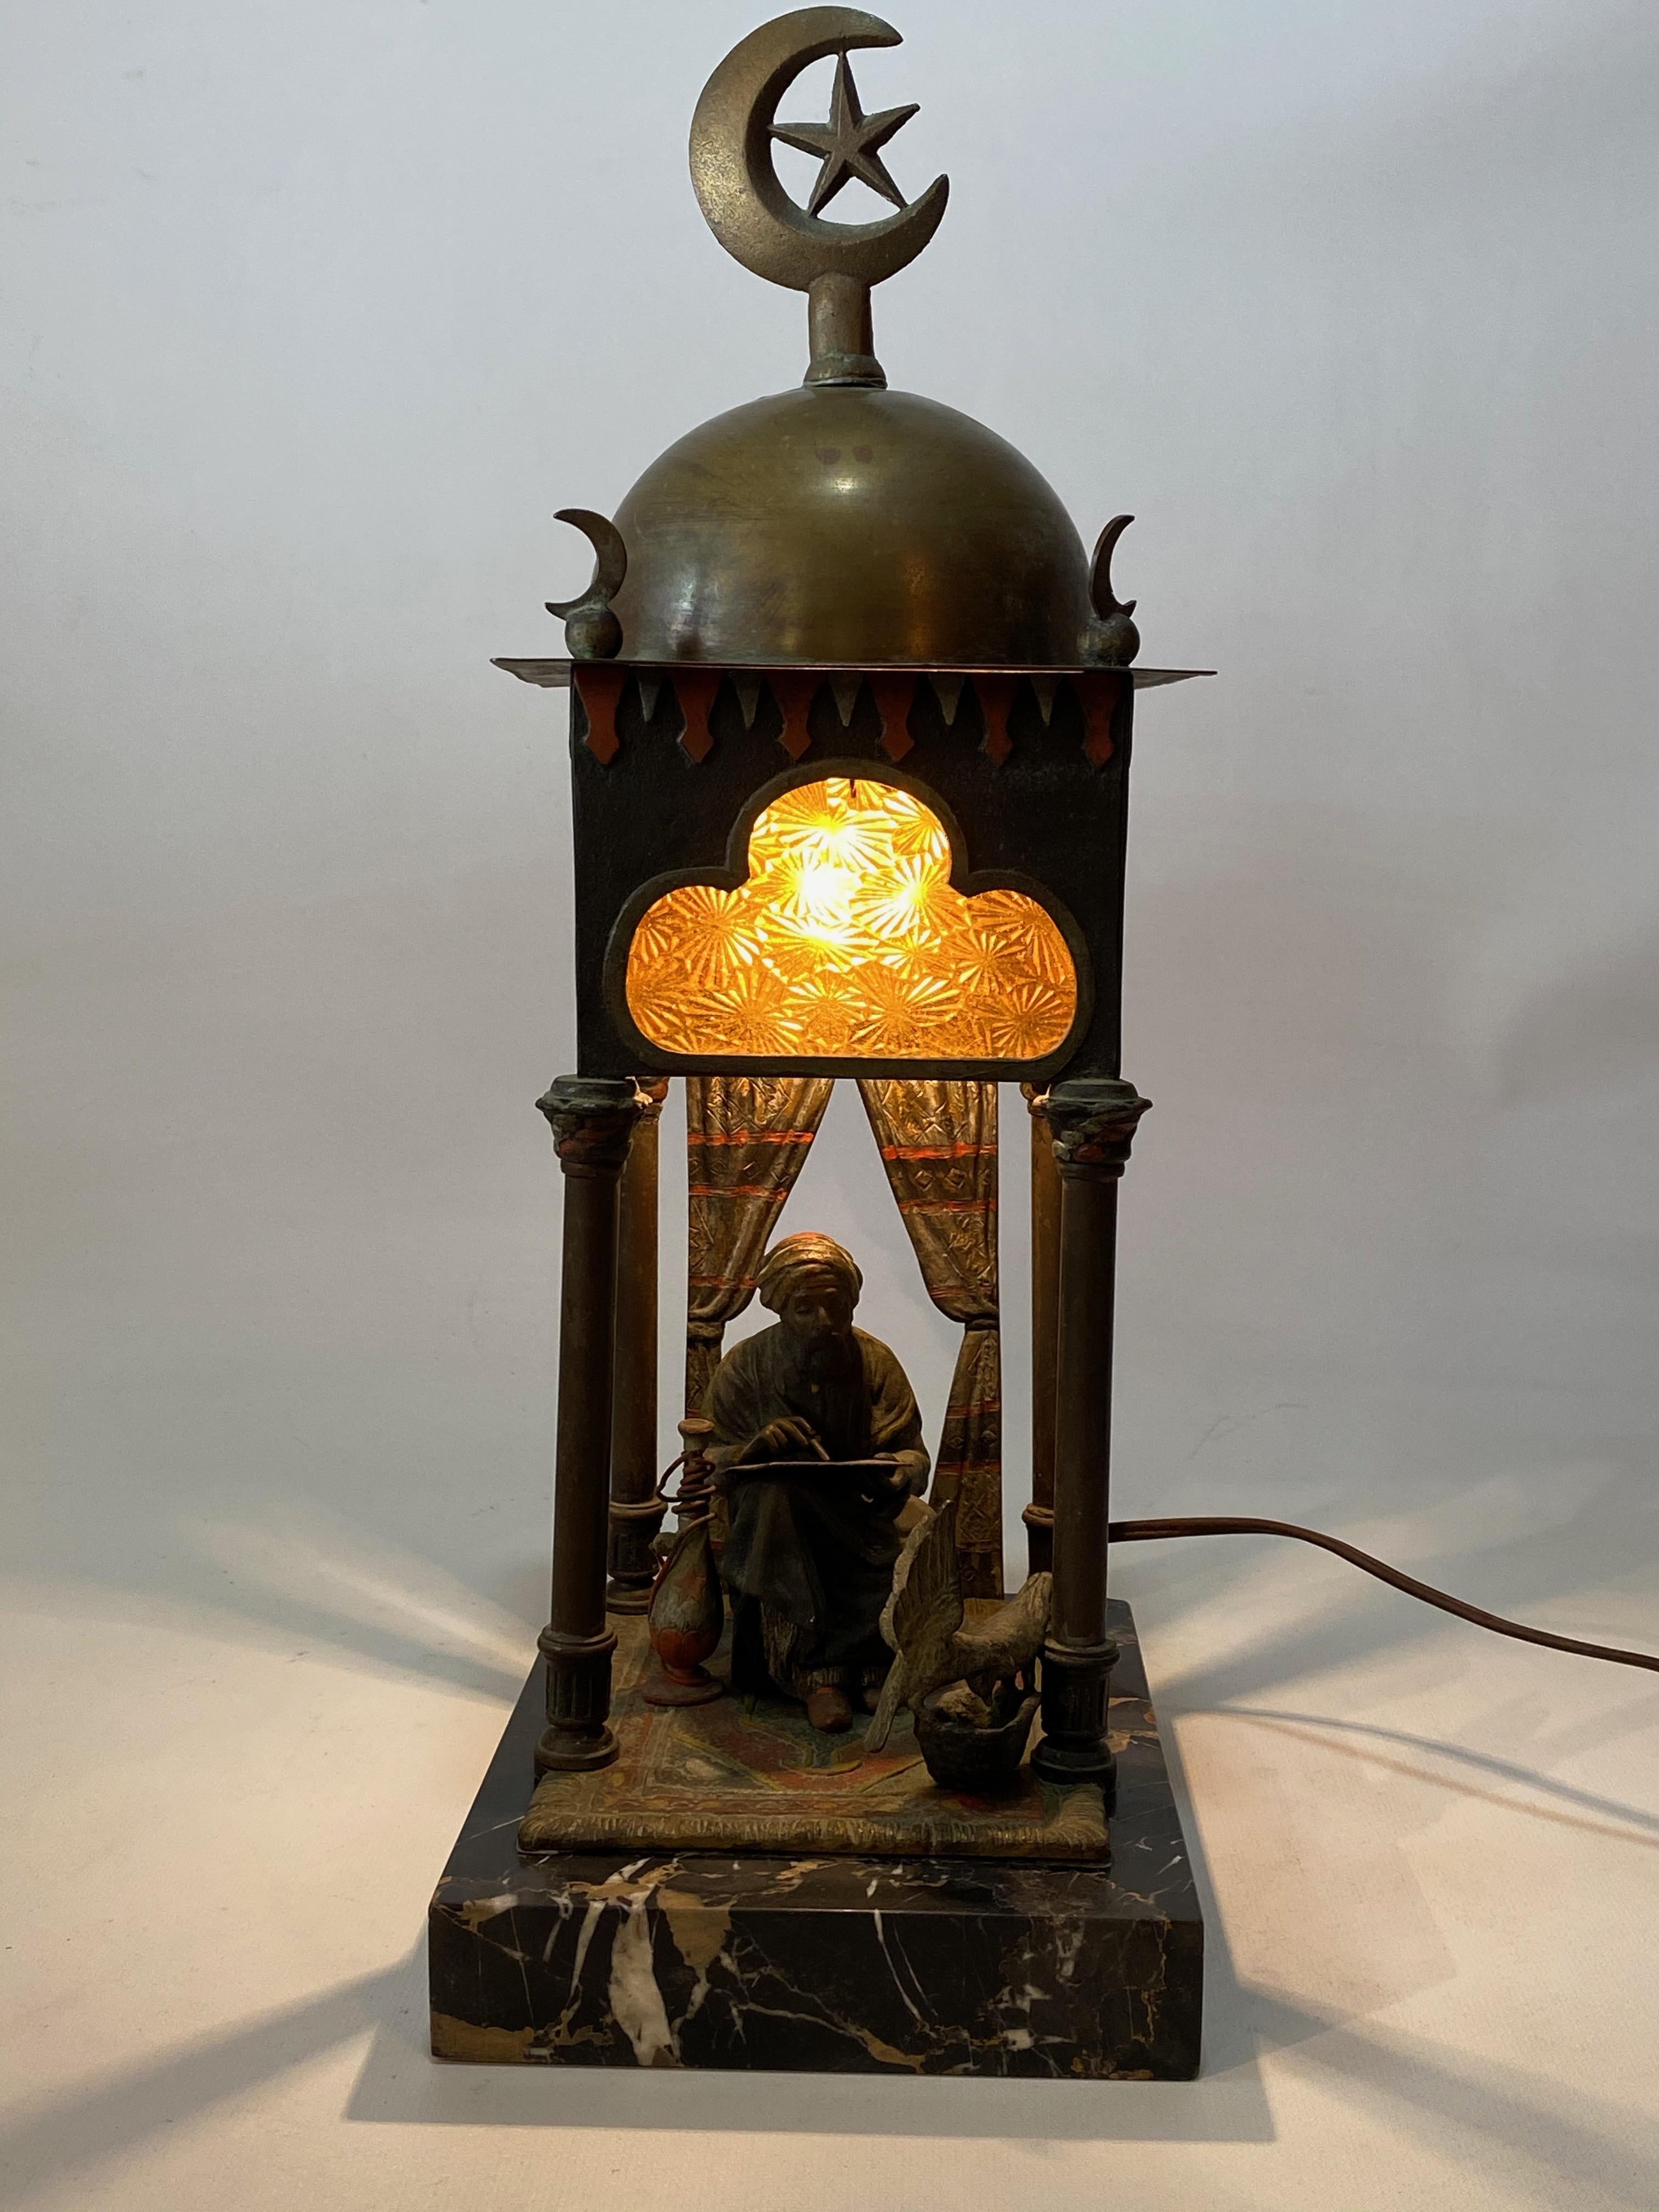 Remarkable orientalist cold painted Austrian bronze lamp featuring a Belgian black marble base, four texture glass panels, the crescent star and most importantly a seated holy man or scribe on a prayer rug. Signed, Ruff on the rear of the piece.